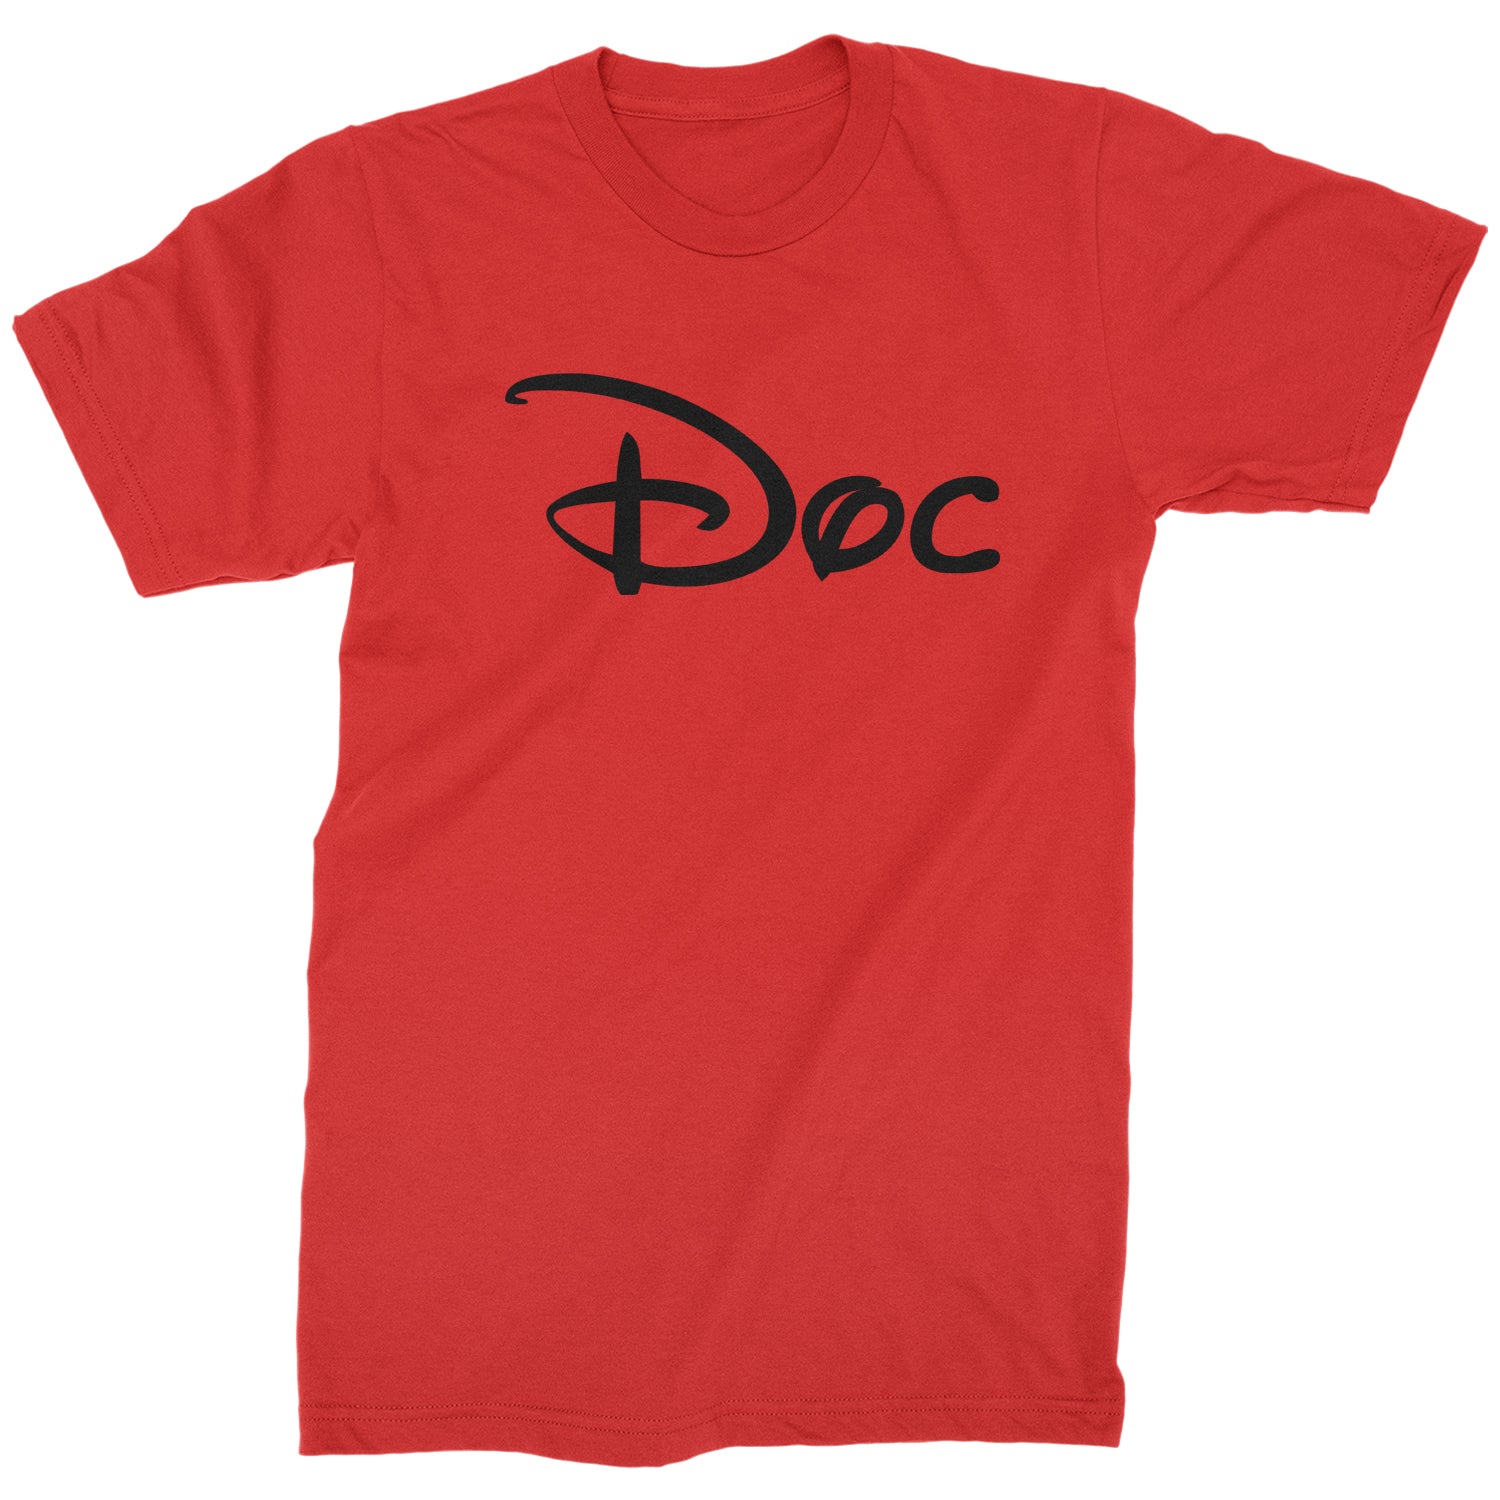 Doc - 7 Dwarfs Costume Mens T-shirt and, costume, dwarfs, group, halloween, matching, seven, snow, the, white by Expression Tees